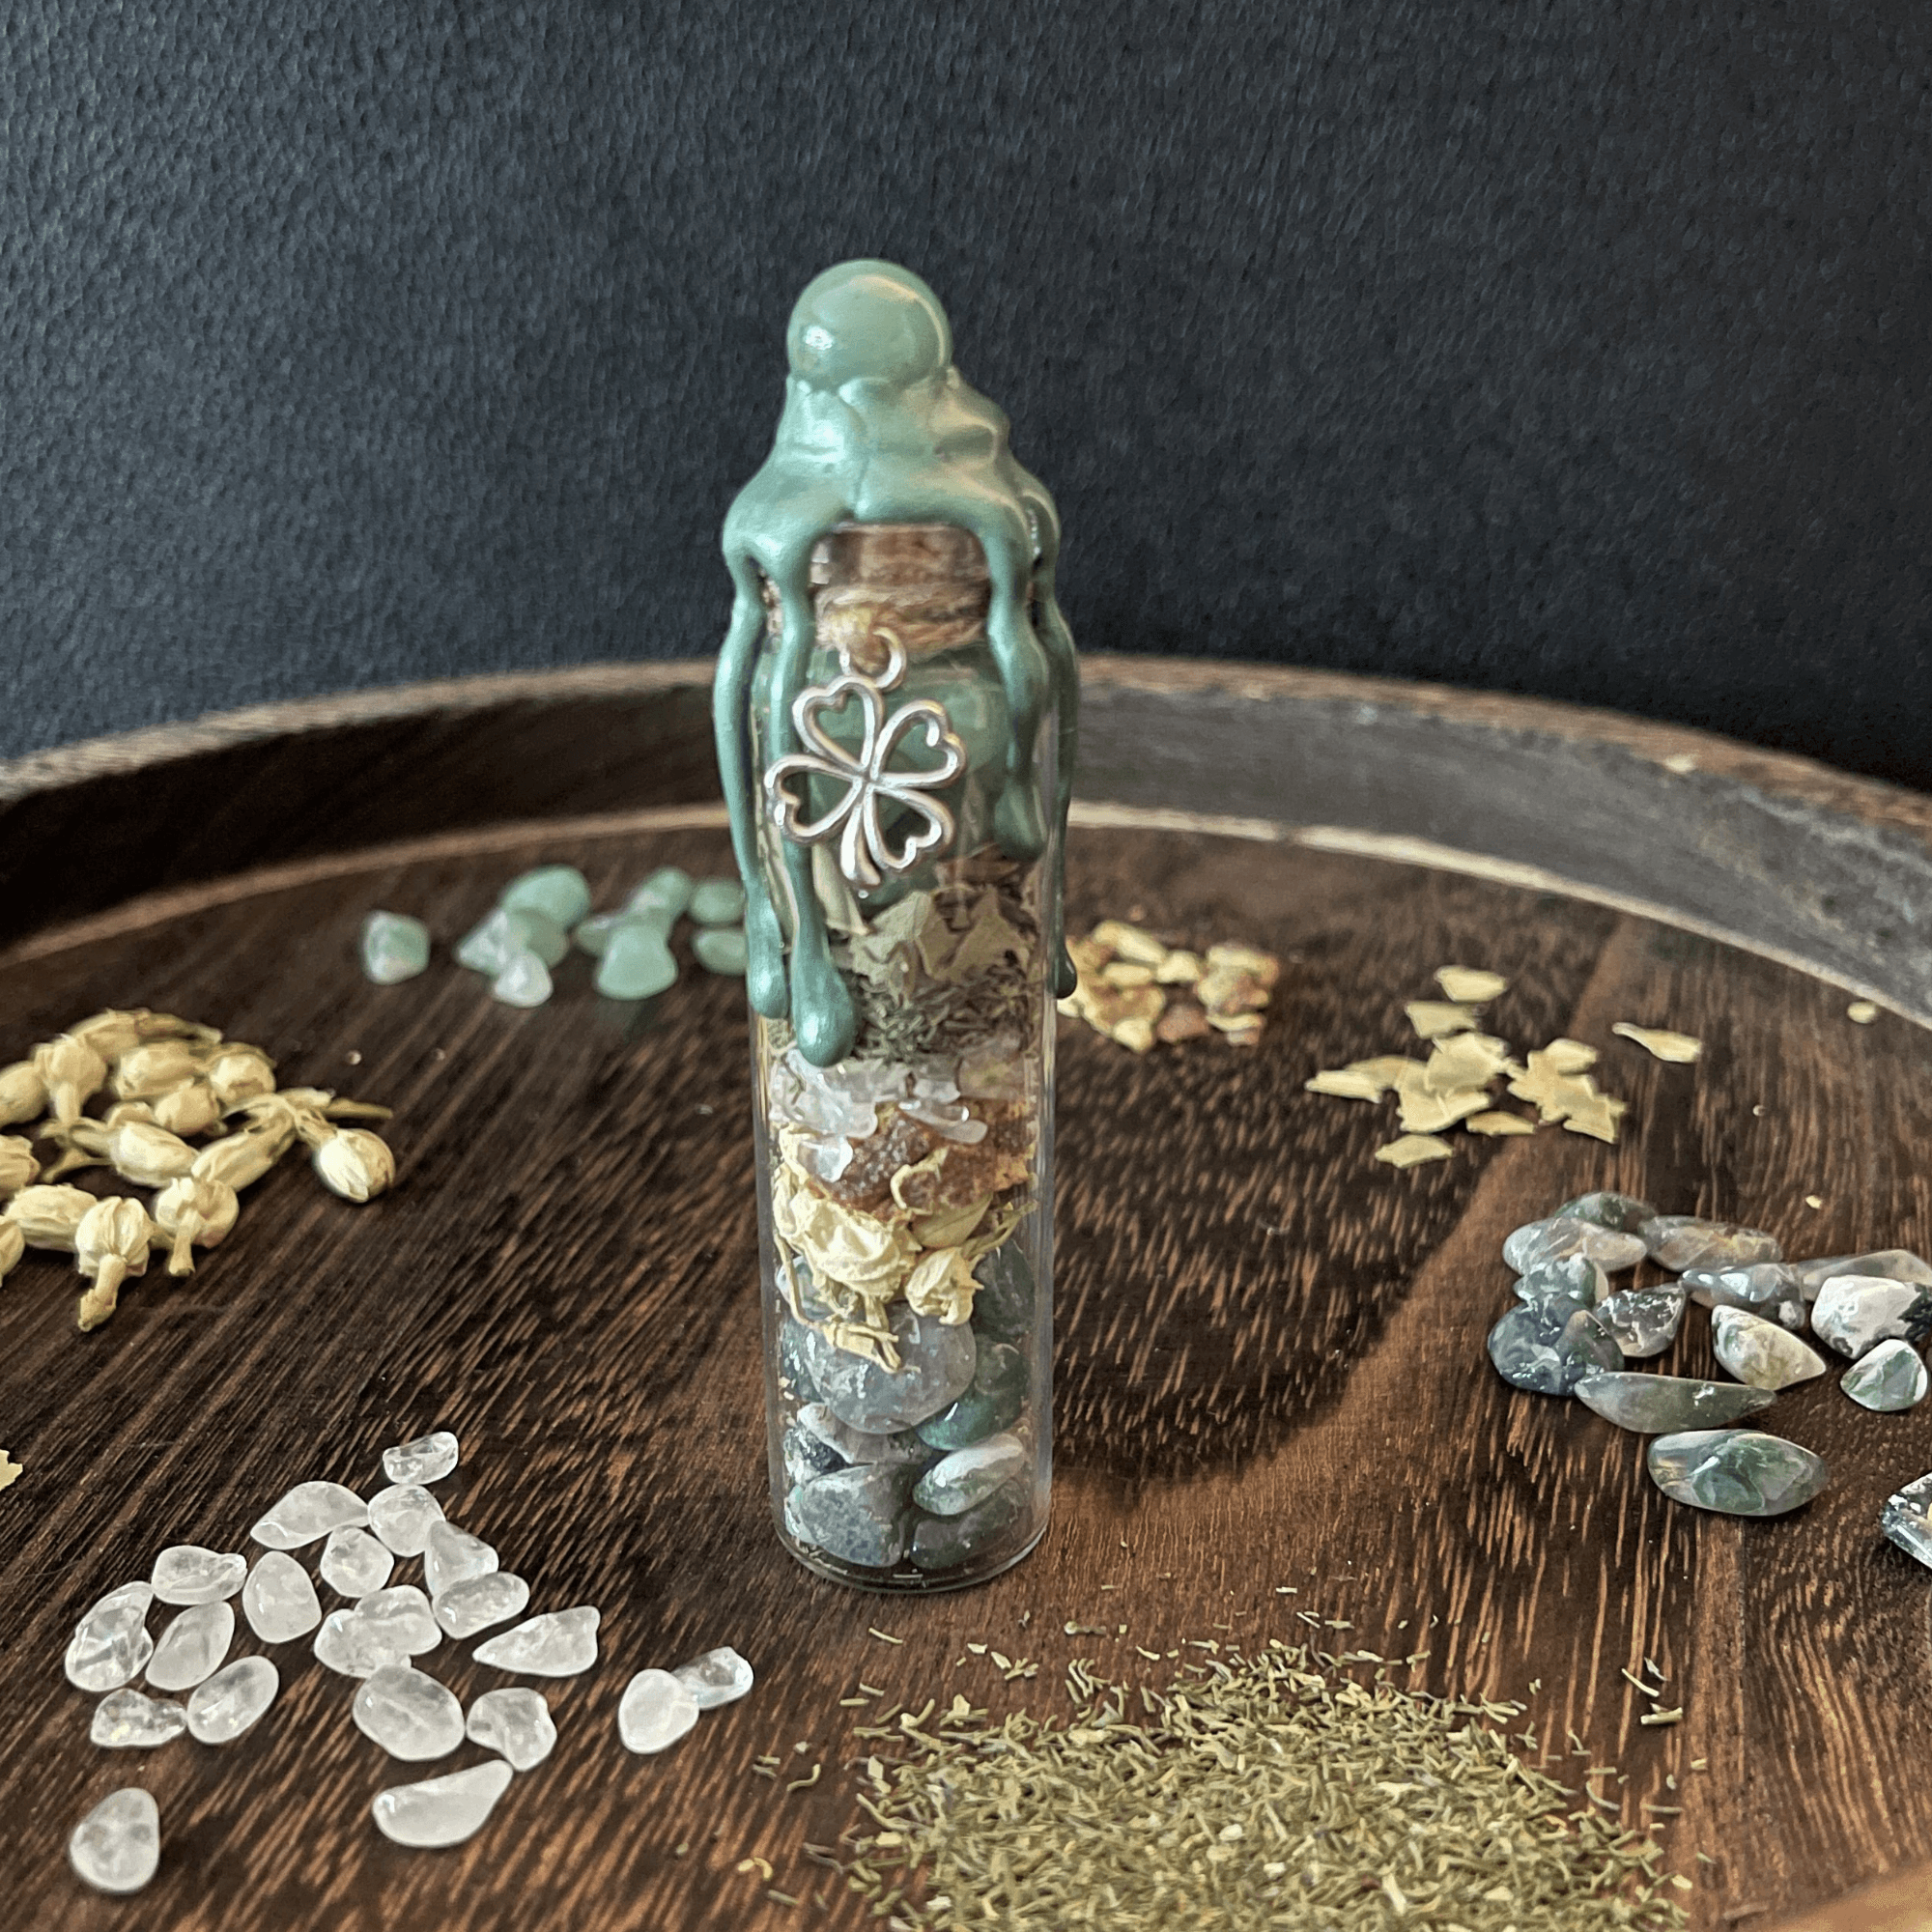 Abundance Spell Jar, Intention Jar, Witch's Spell Bottle - Classic Variable